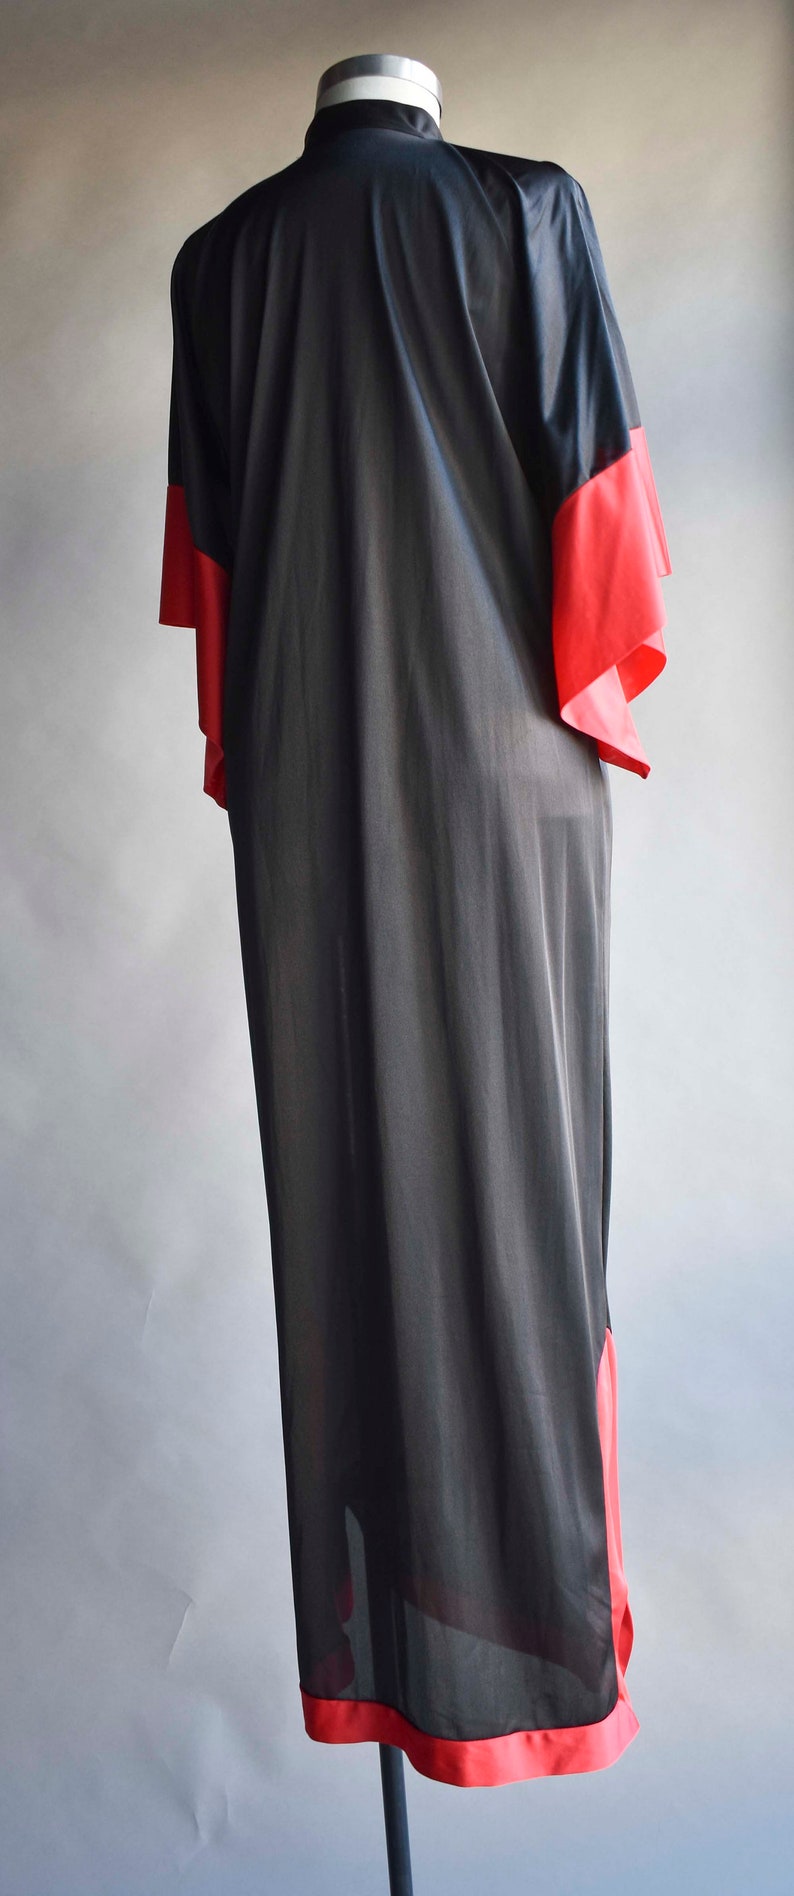 Vintage 70s Black and Red Nightgown / 70s Long Nightgown / Gothic Vintage Nightgown / Red and Black / Black and Red Nightgown / 70s robe image 8